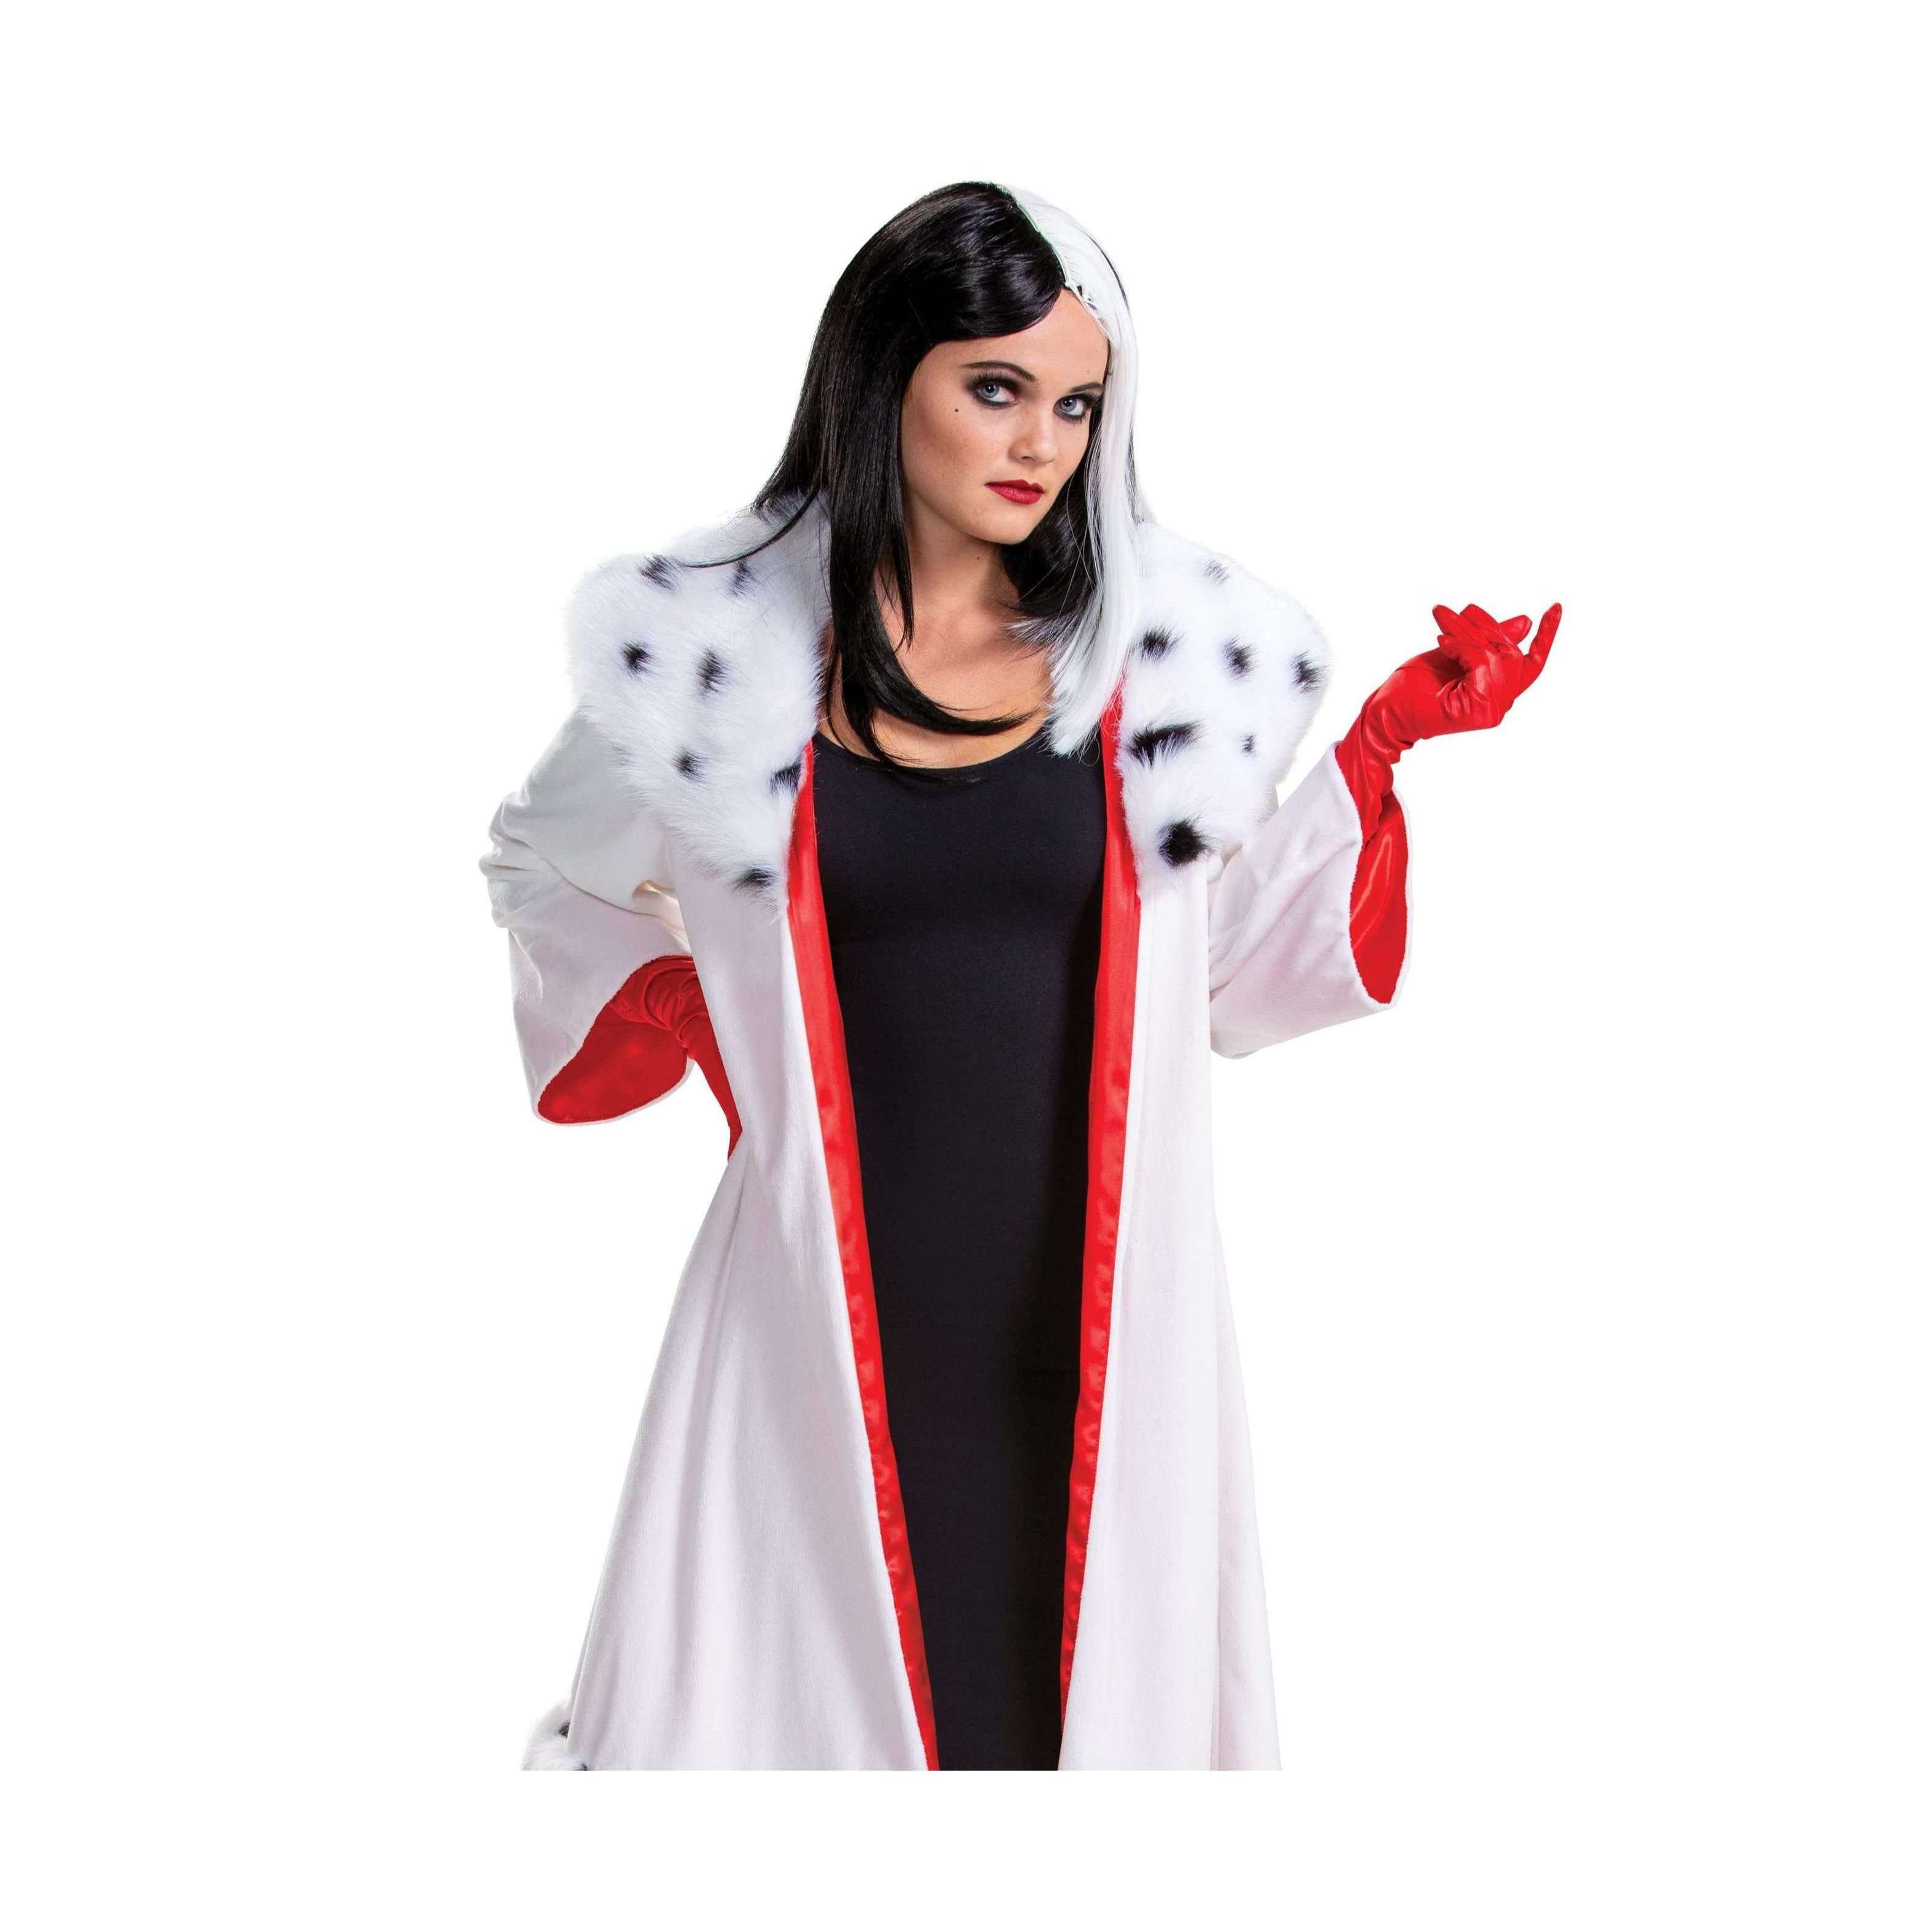 CRUELLA'S COSTUMES ARE THE STAR OF THIS FASHION FILM - Dress The Part